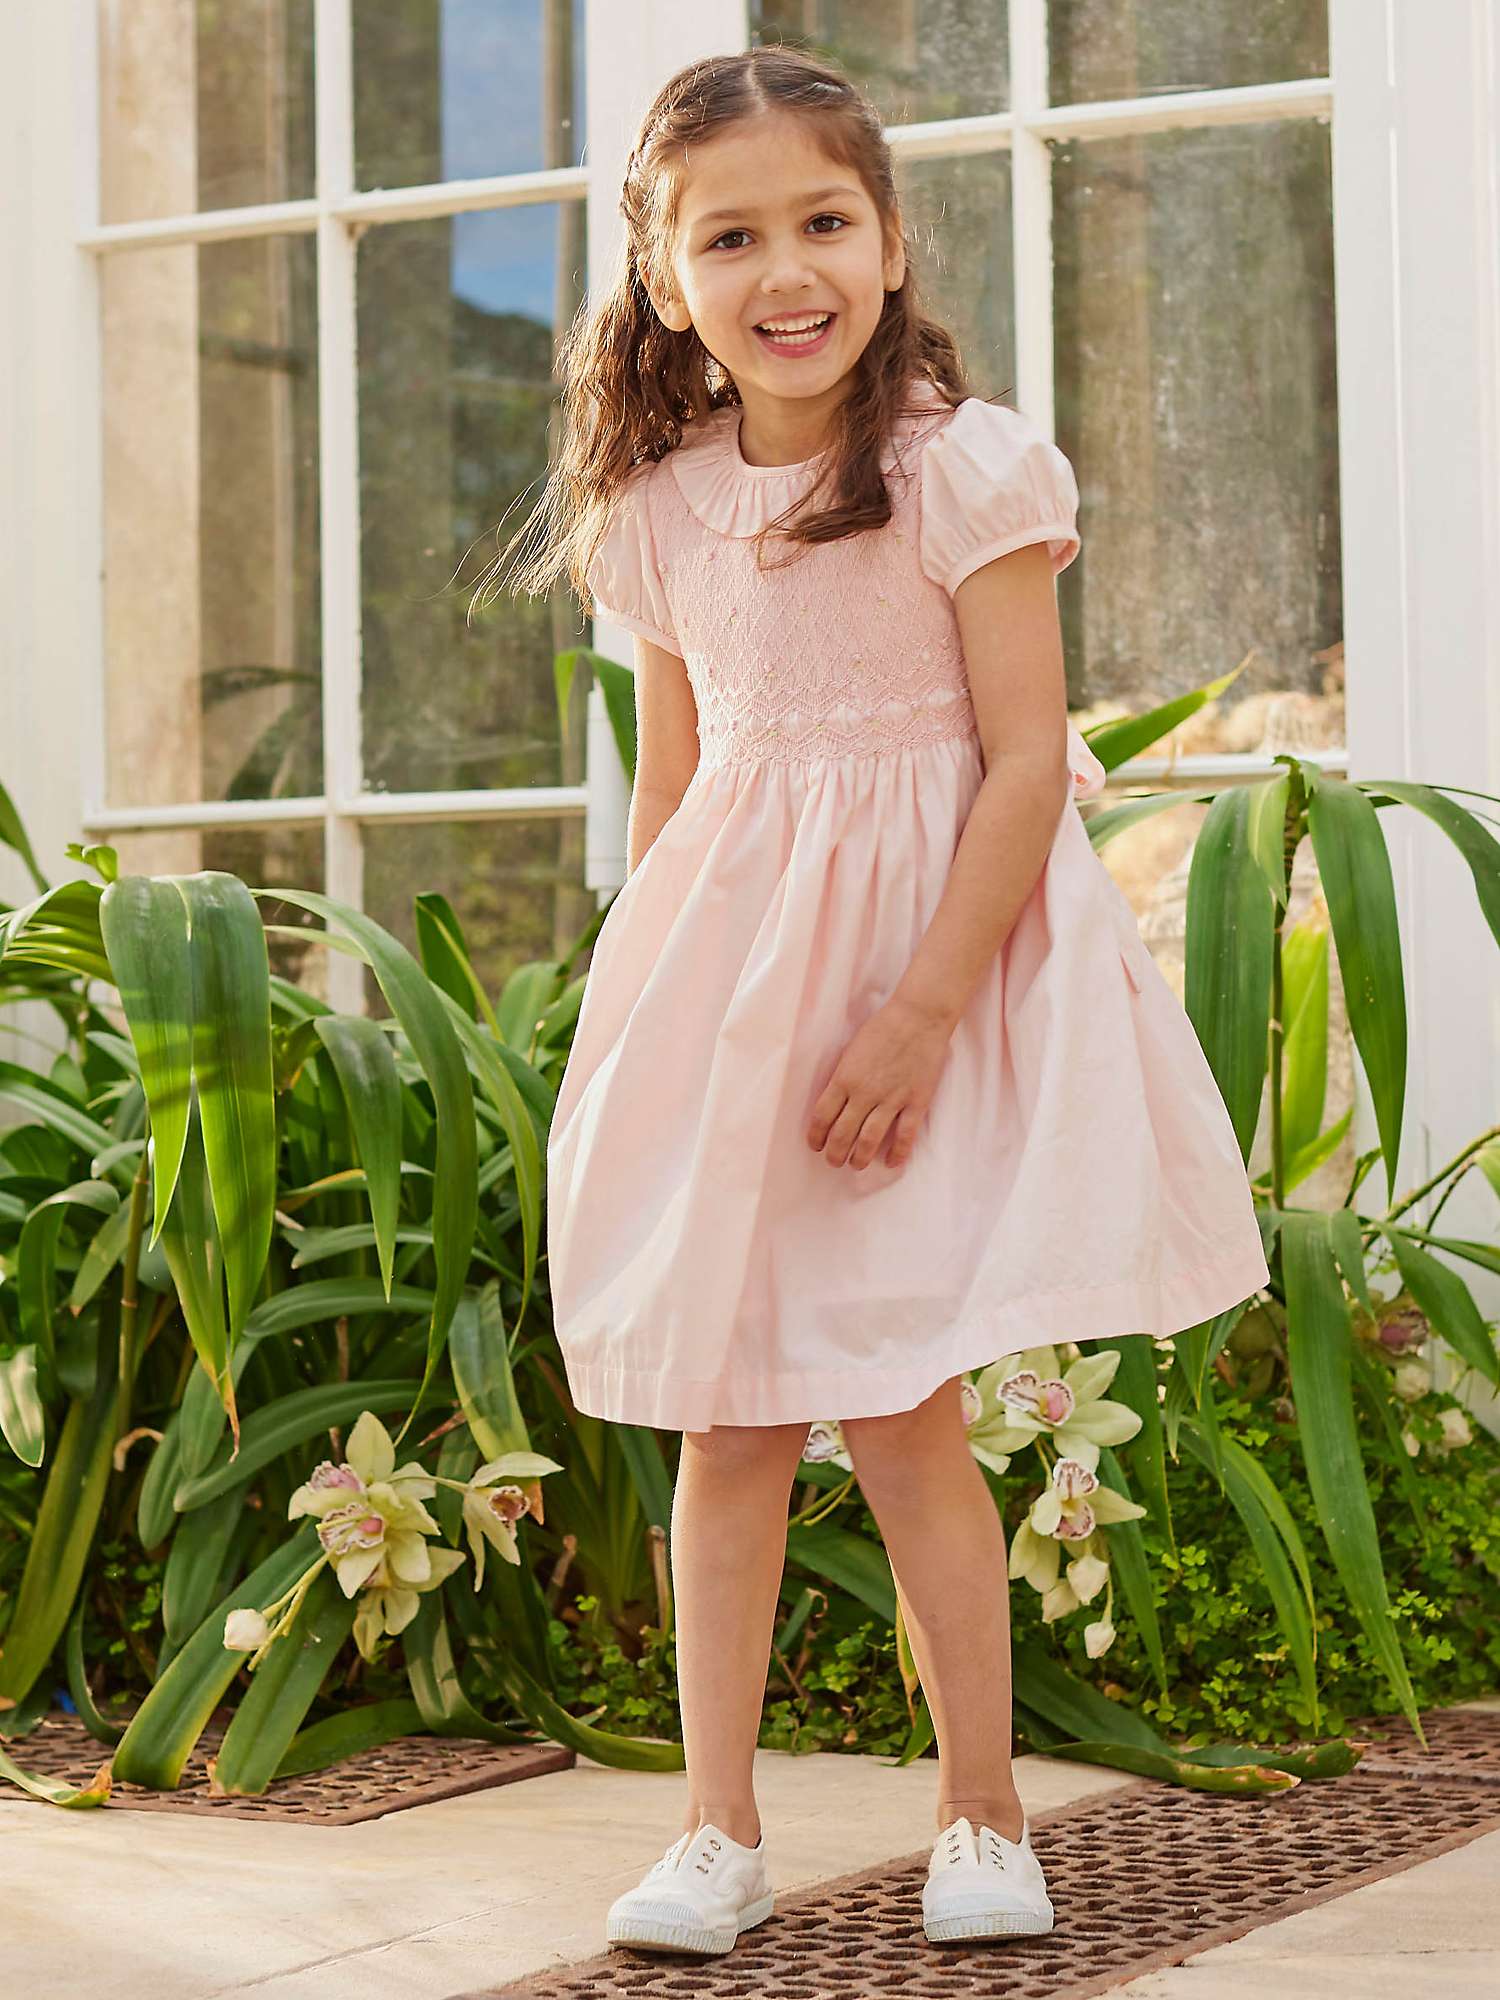 Buy Trotters Lily Rose Kids' Lily Smock Front Occasion Dress, Peach Online at johnlewis.com